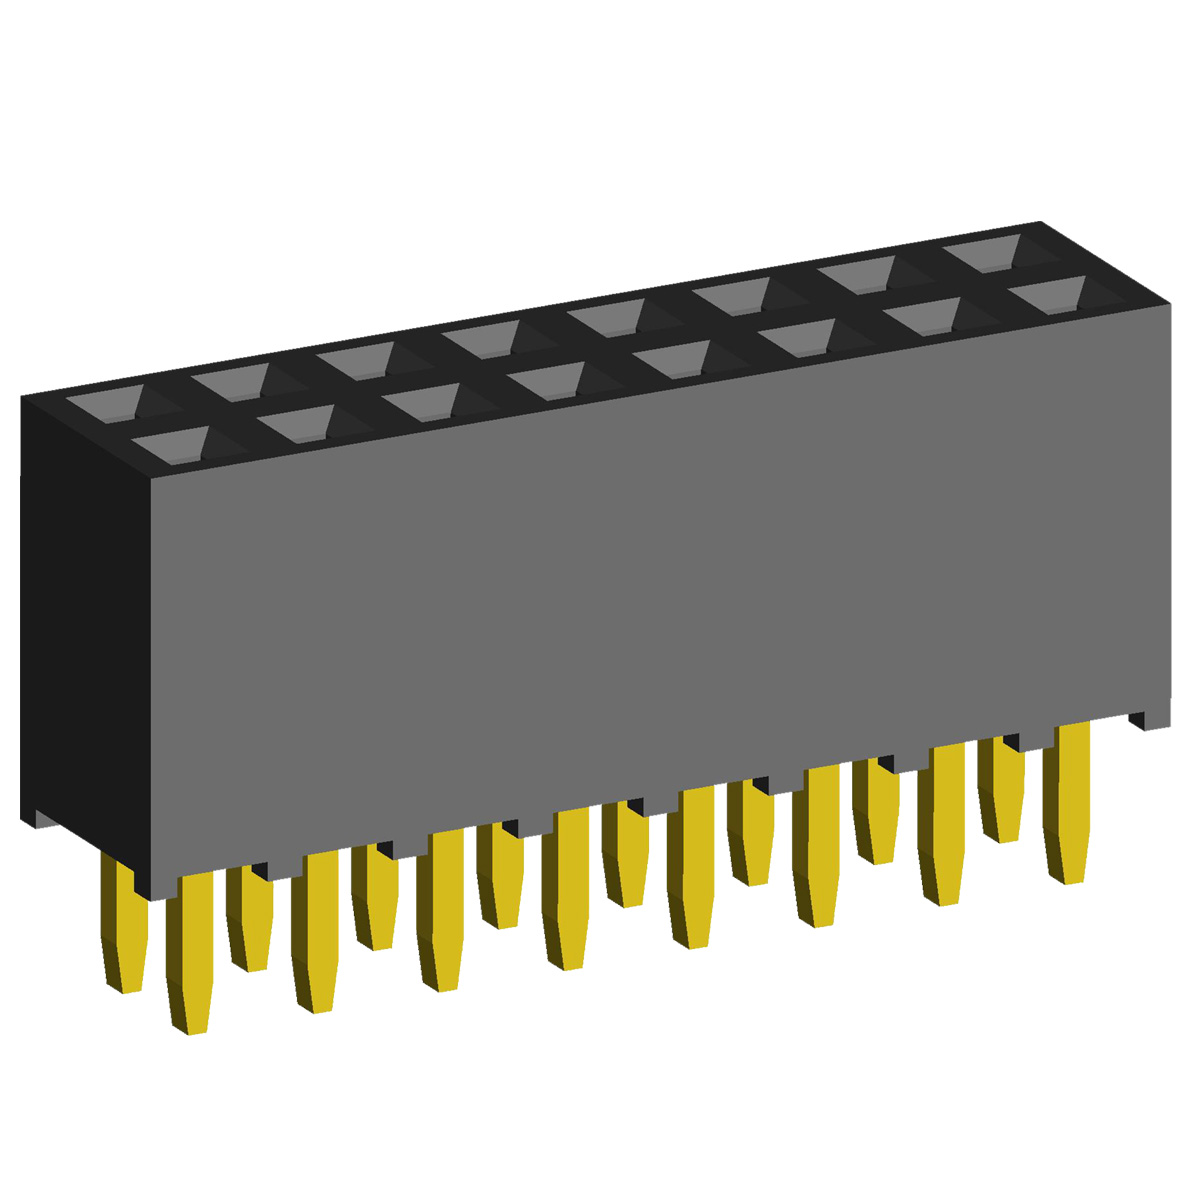 Open pin headers and Sockets for its, PCB/PCB (Board-to-Board) types with pitch 2,00x2,00 Pitch between pins in one row and sockets for them